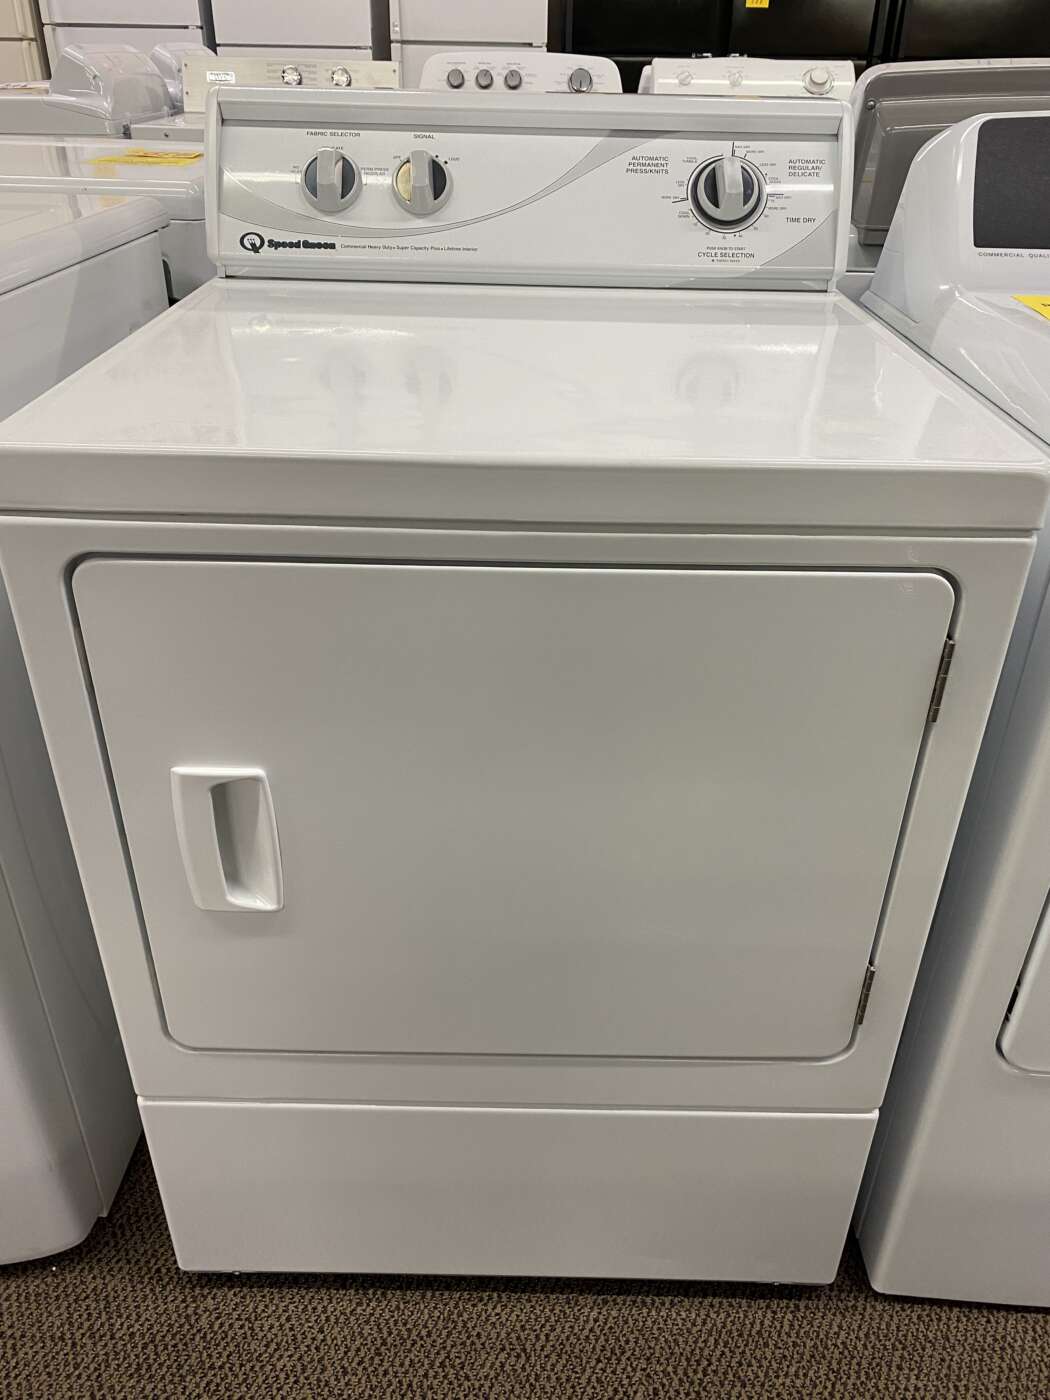 Reconditioned SPEED QUEEN 7.0 Cu. Ft. GAS Dryer – White